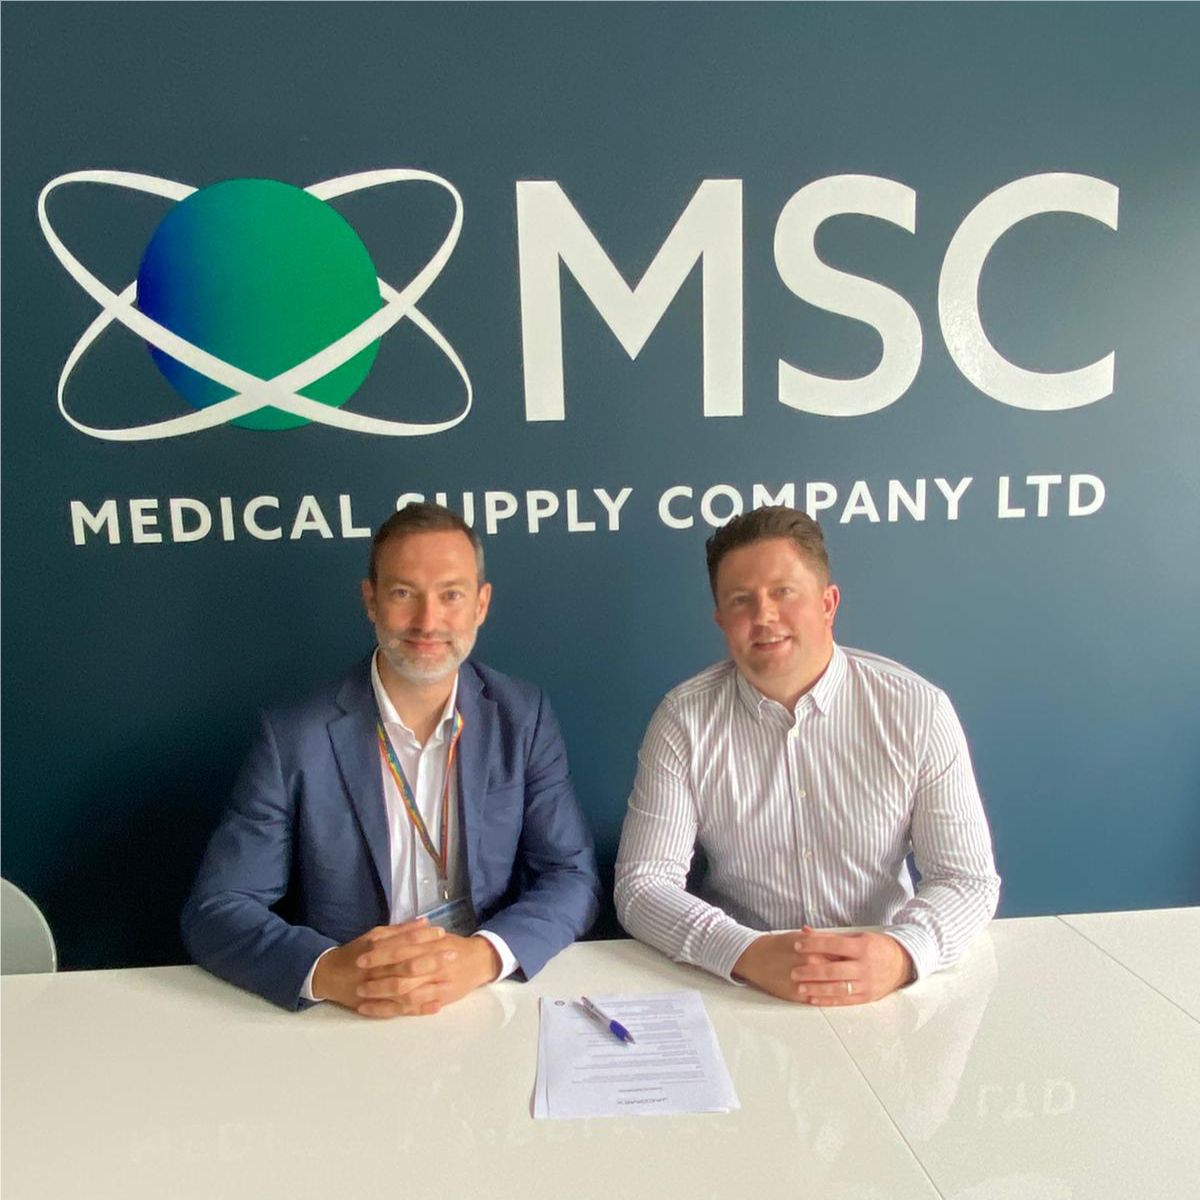 Partnership with the company Medical Supply Company (MSC) for the distribution and servicing of Jacomex in Ireland